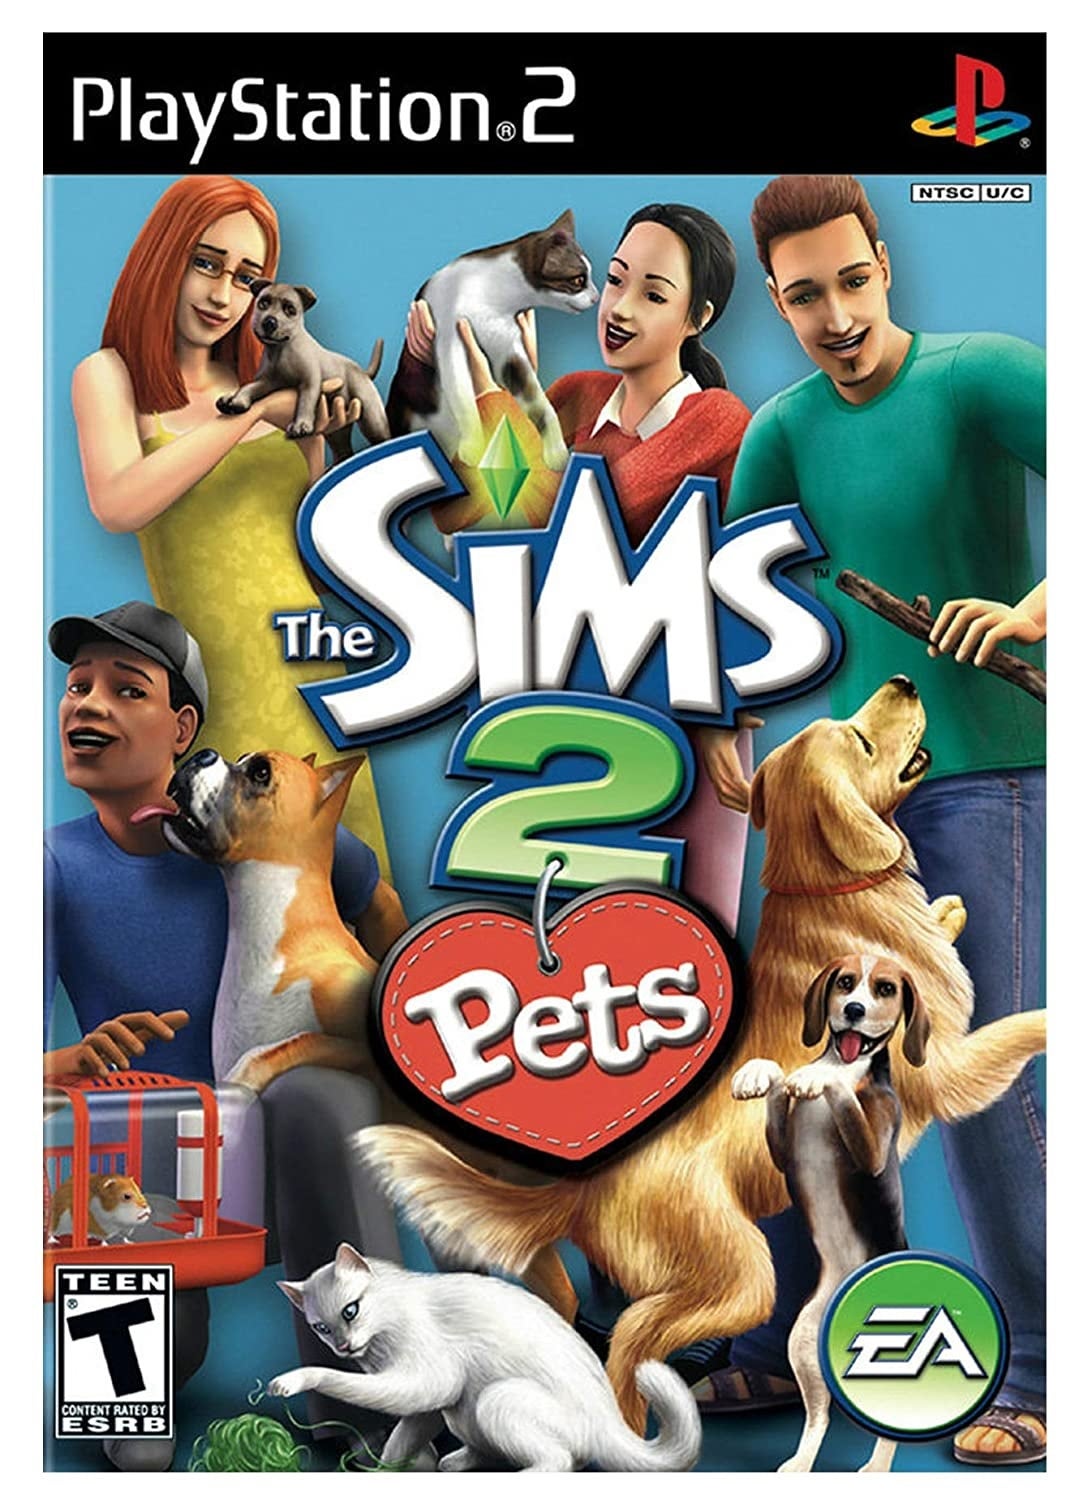 Electronic Arts The Sims 2 Pets Refurbished PS2 Playstation 2 Game